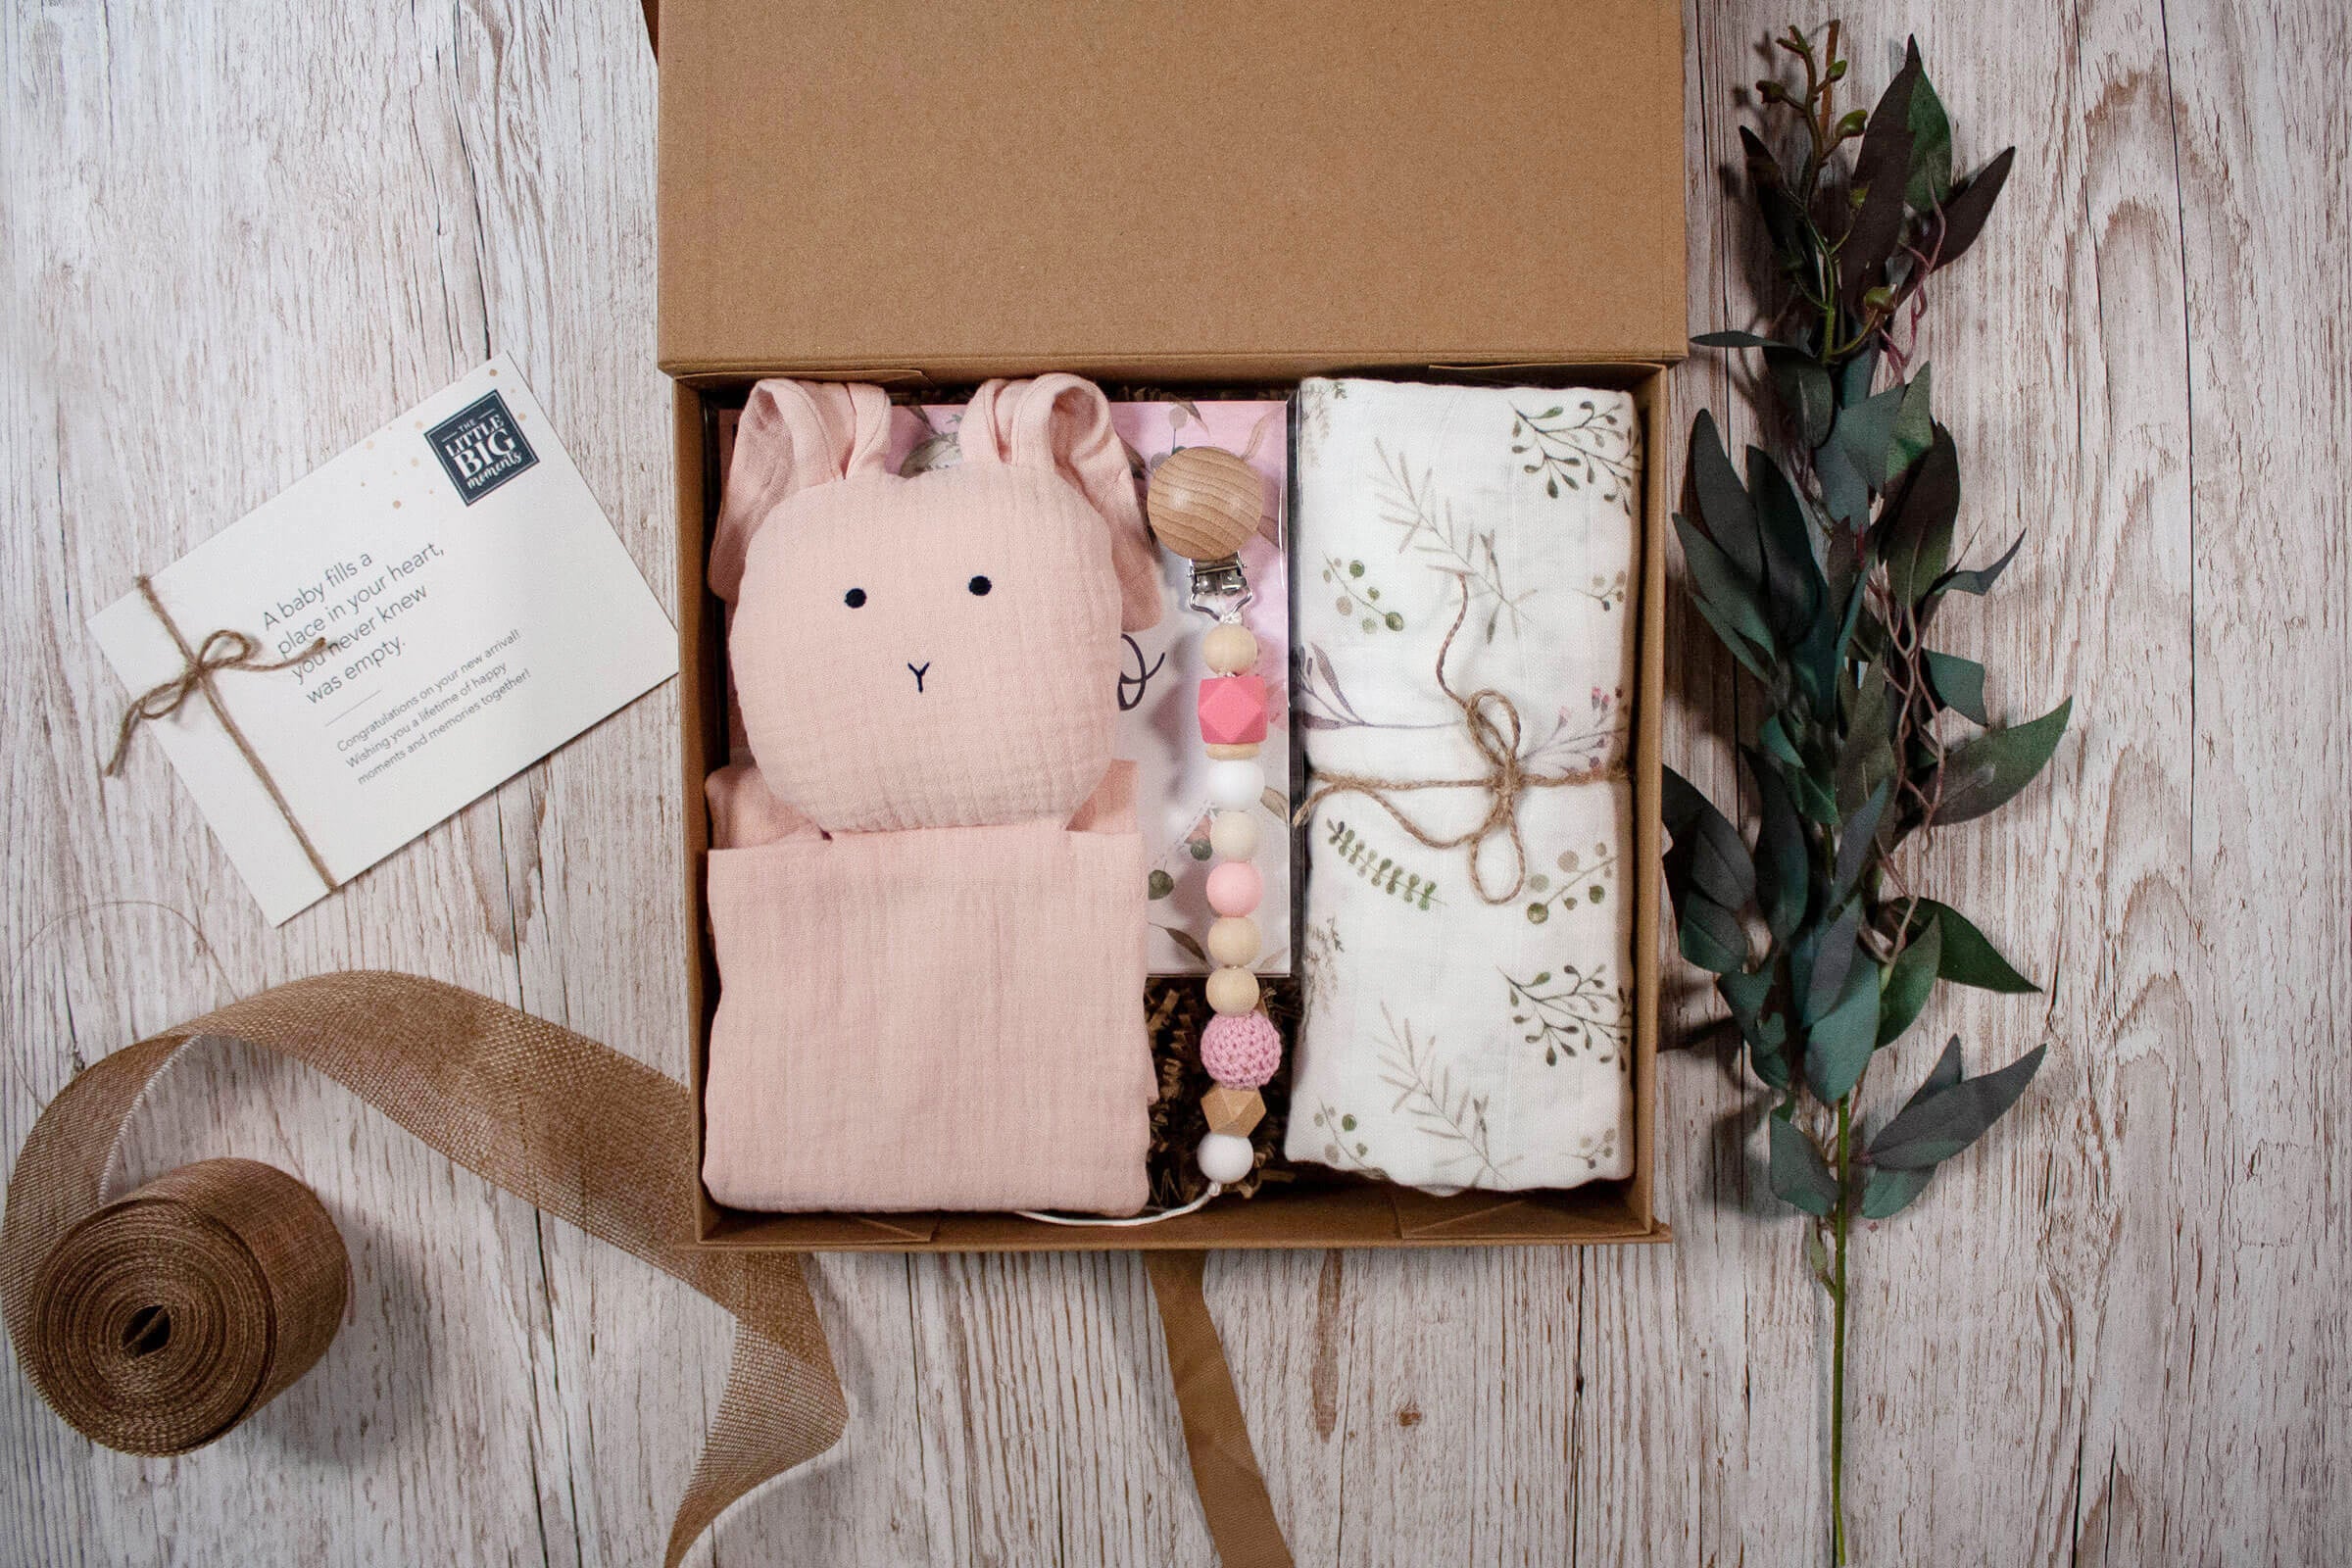 pink woodland themed baby gift set